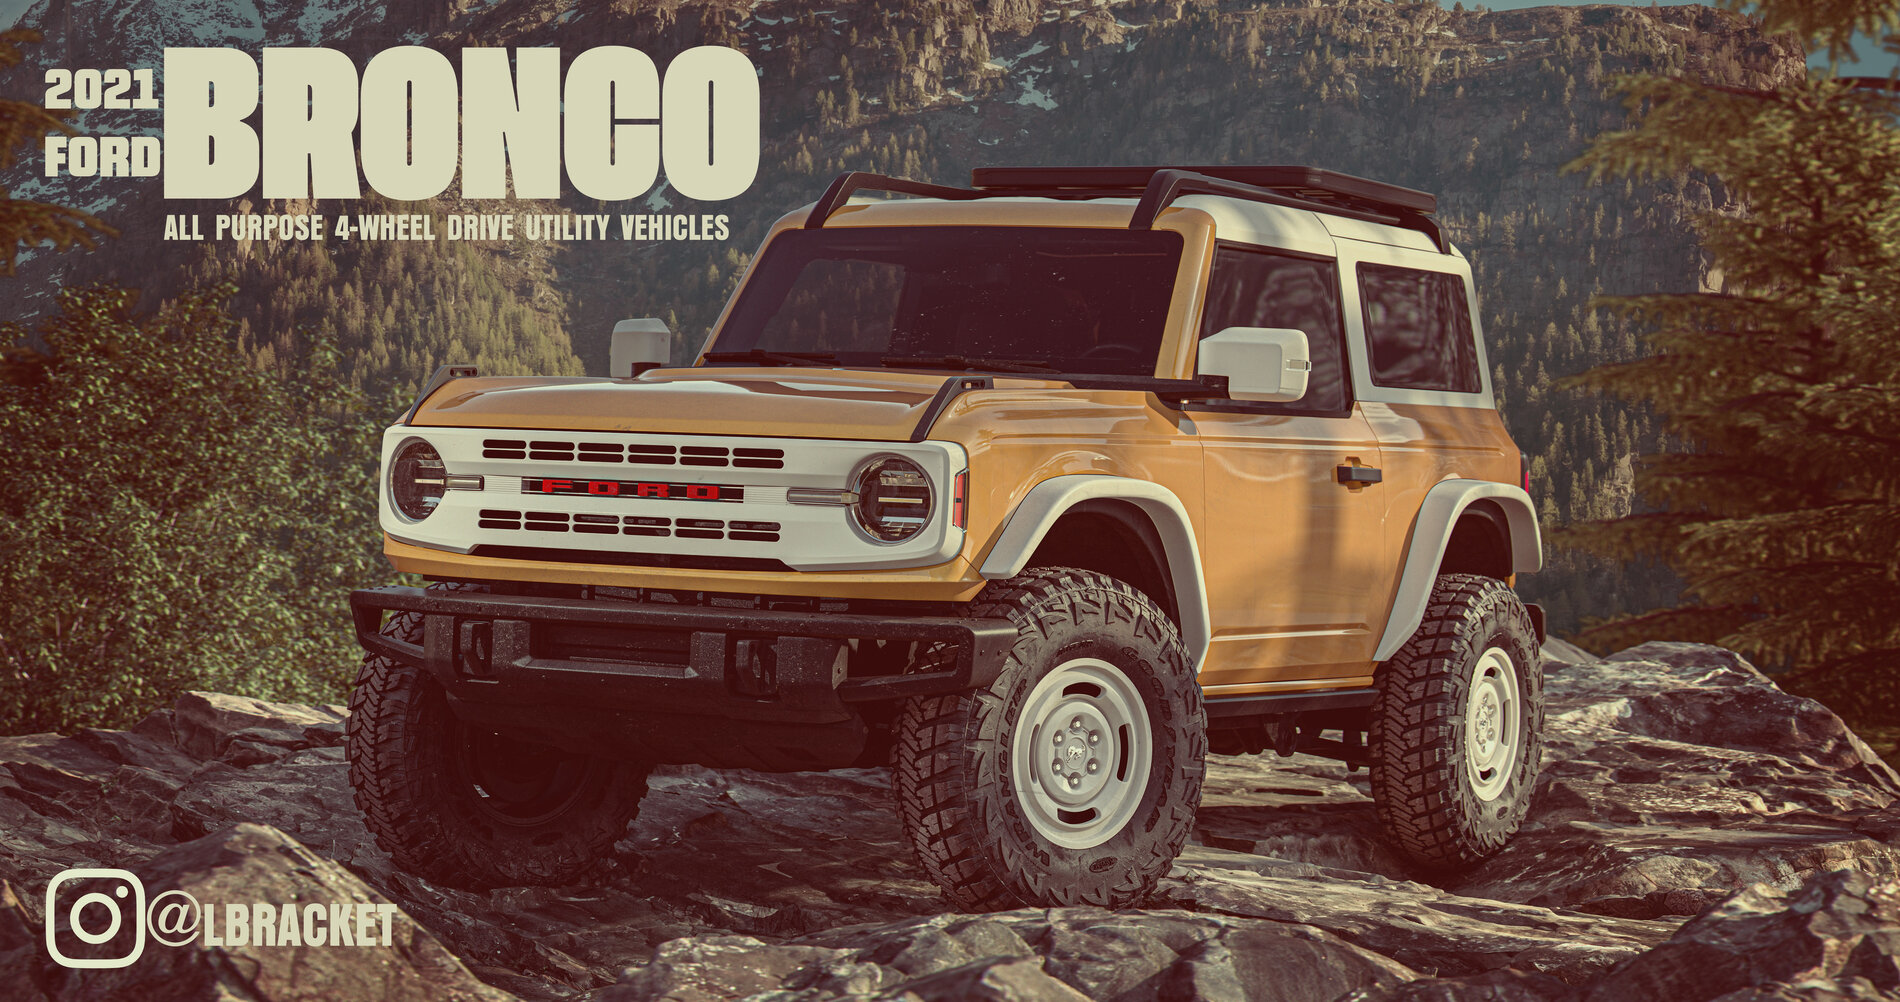 2022 Ford Bronco Heritage Edition - A Closer Look (Dedicated Thread for